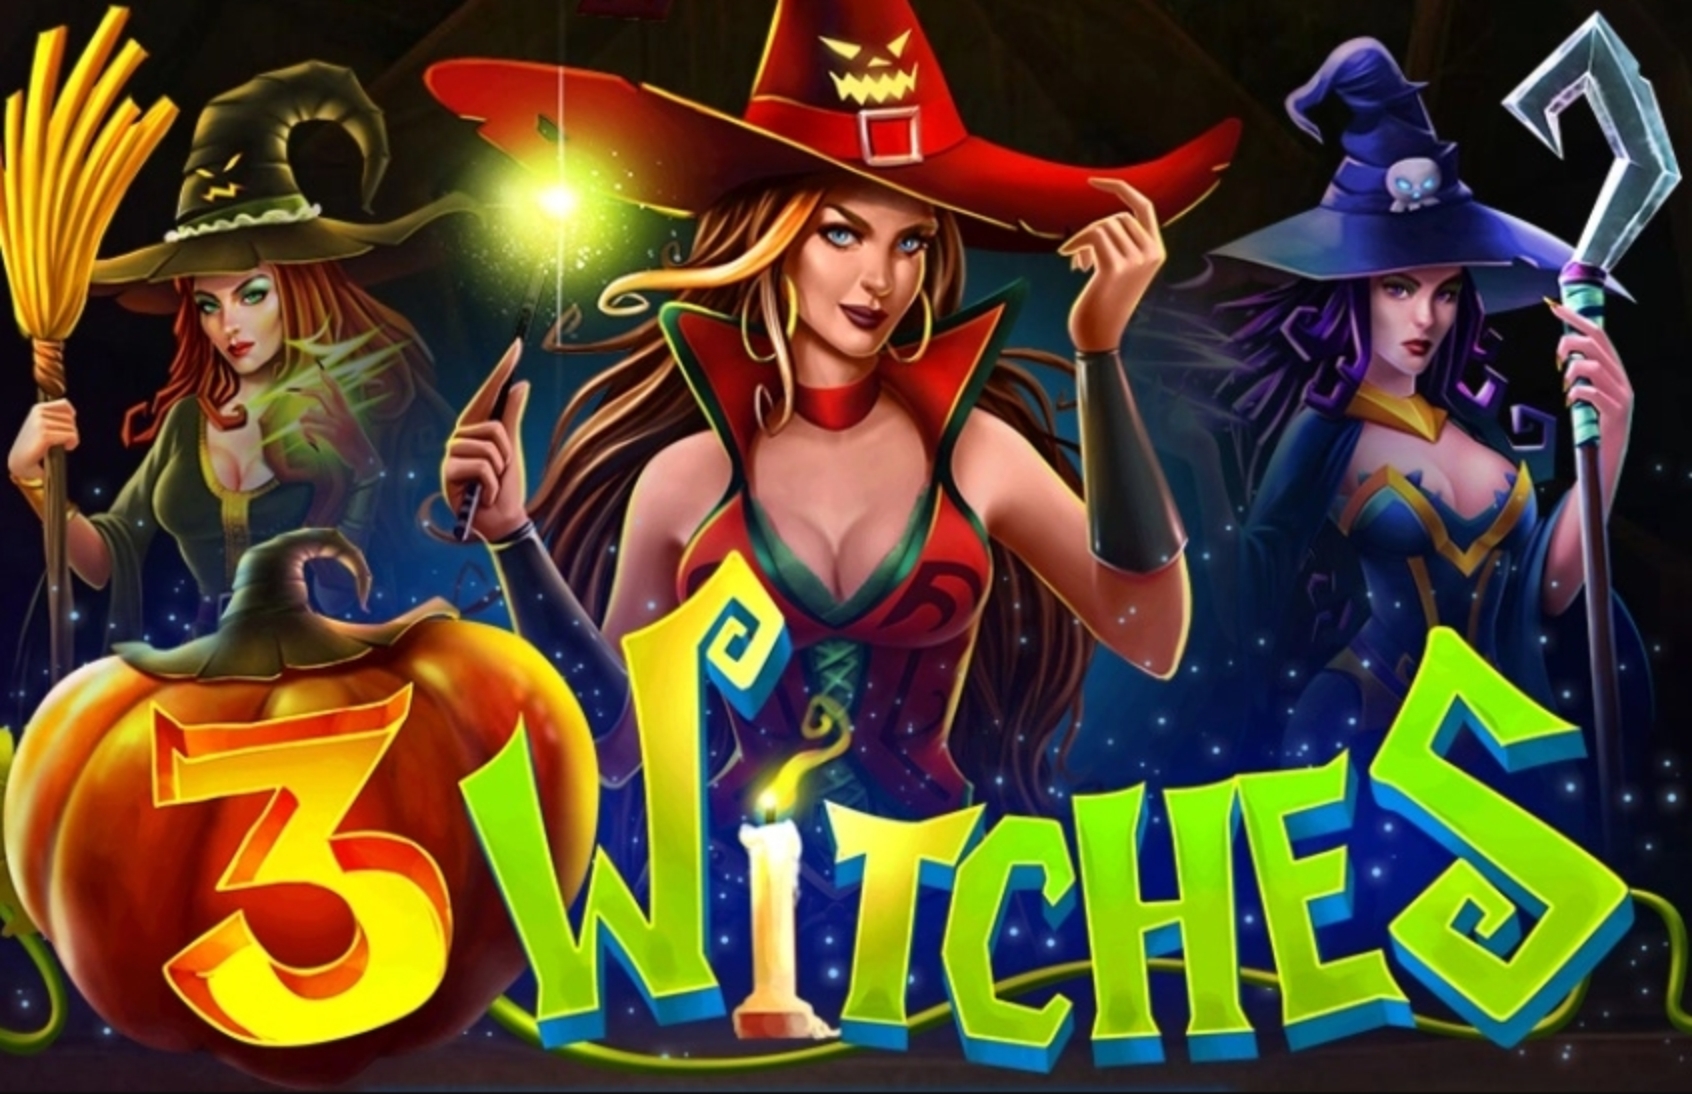 3 Witches demo